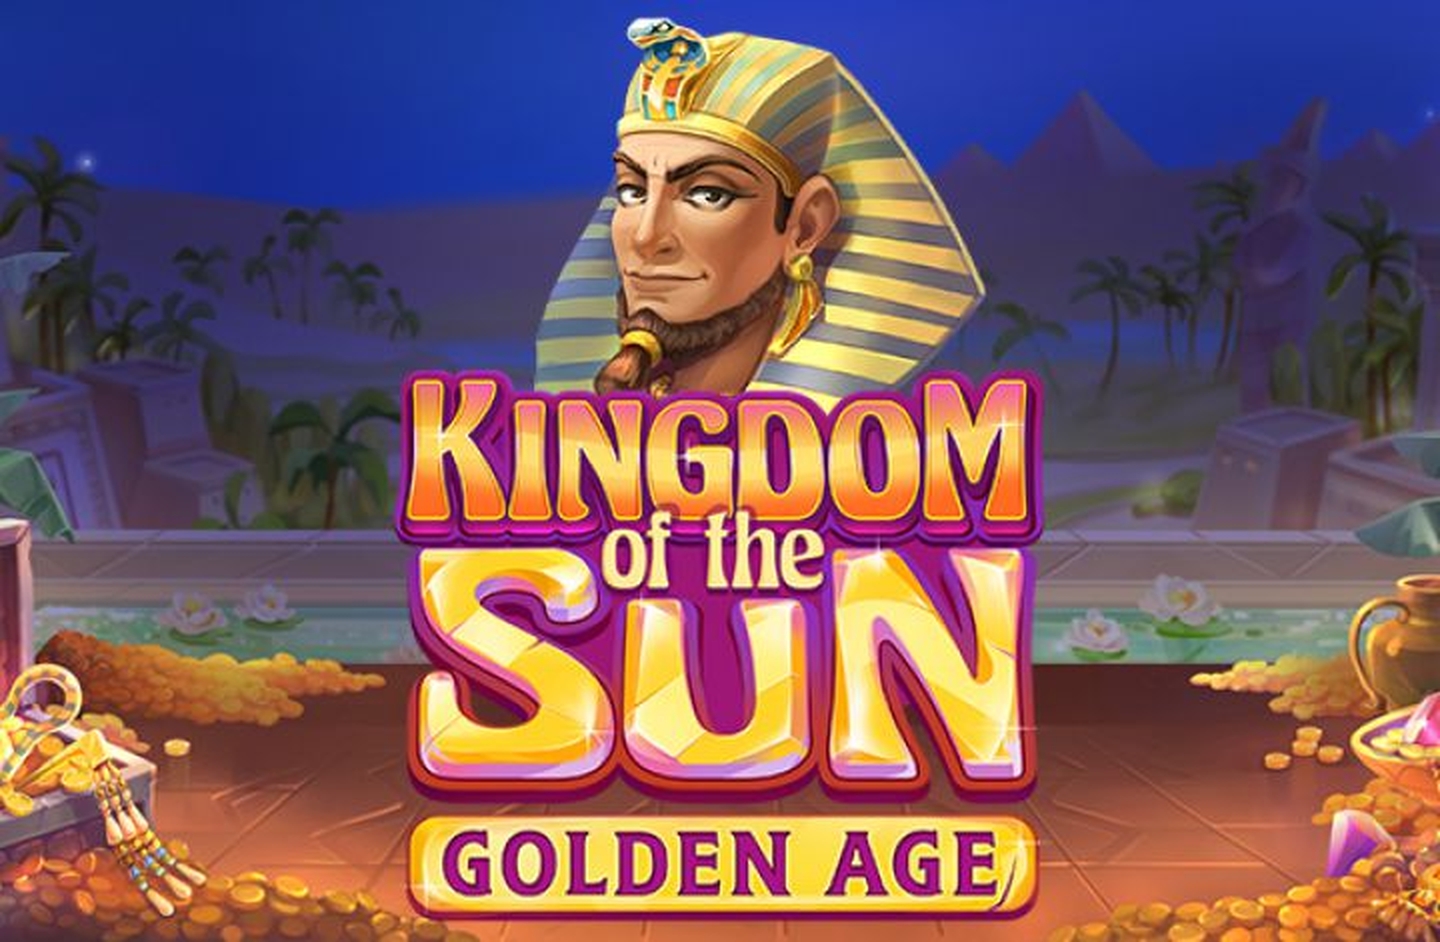 The Kingdom of the Sun: Golden Age Online Slot Demo Game by Playson